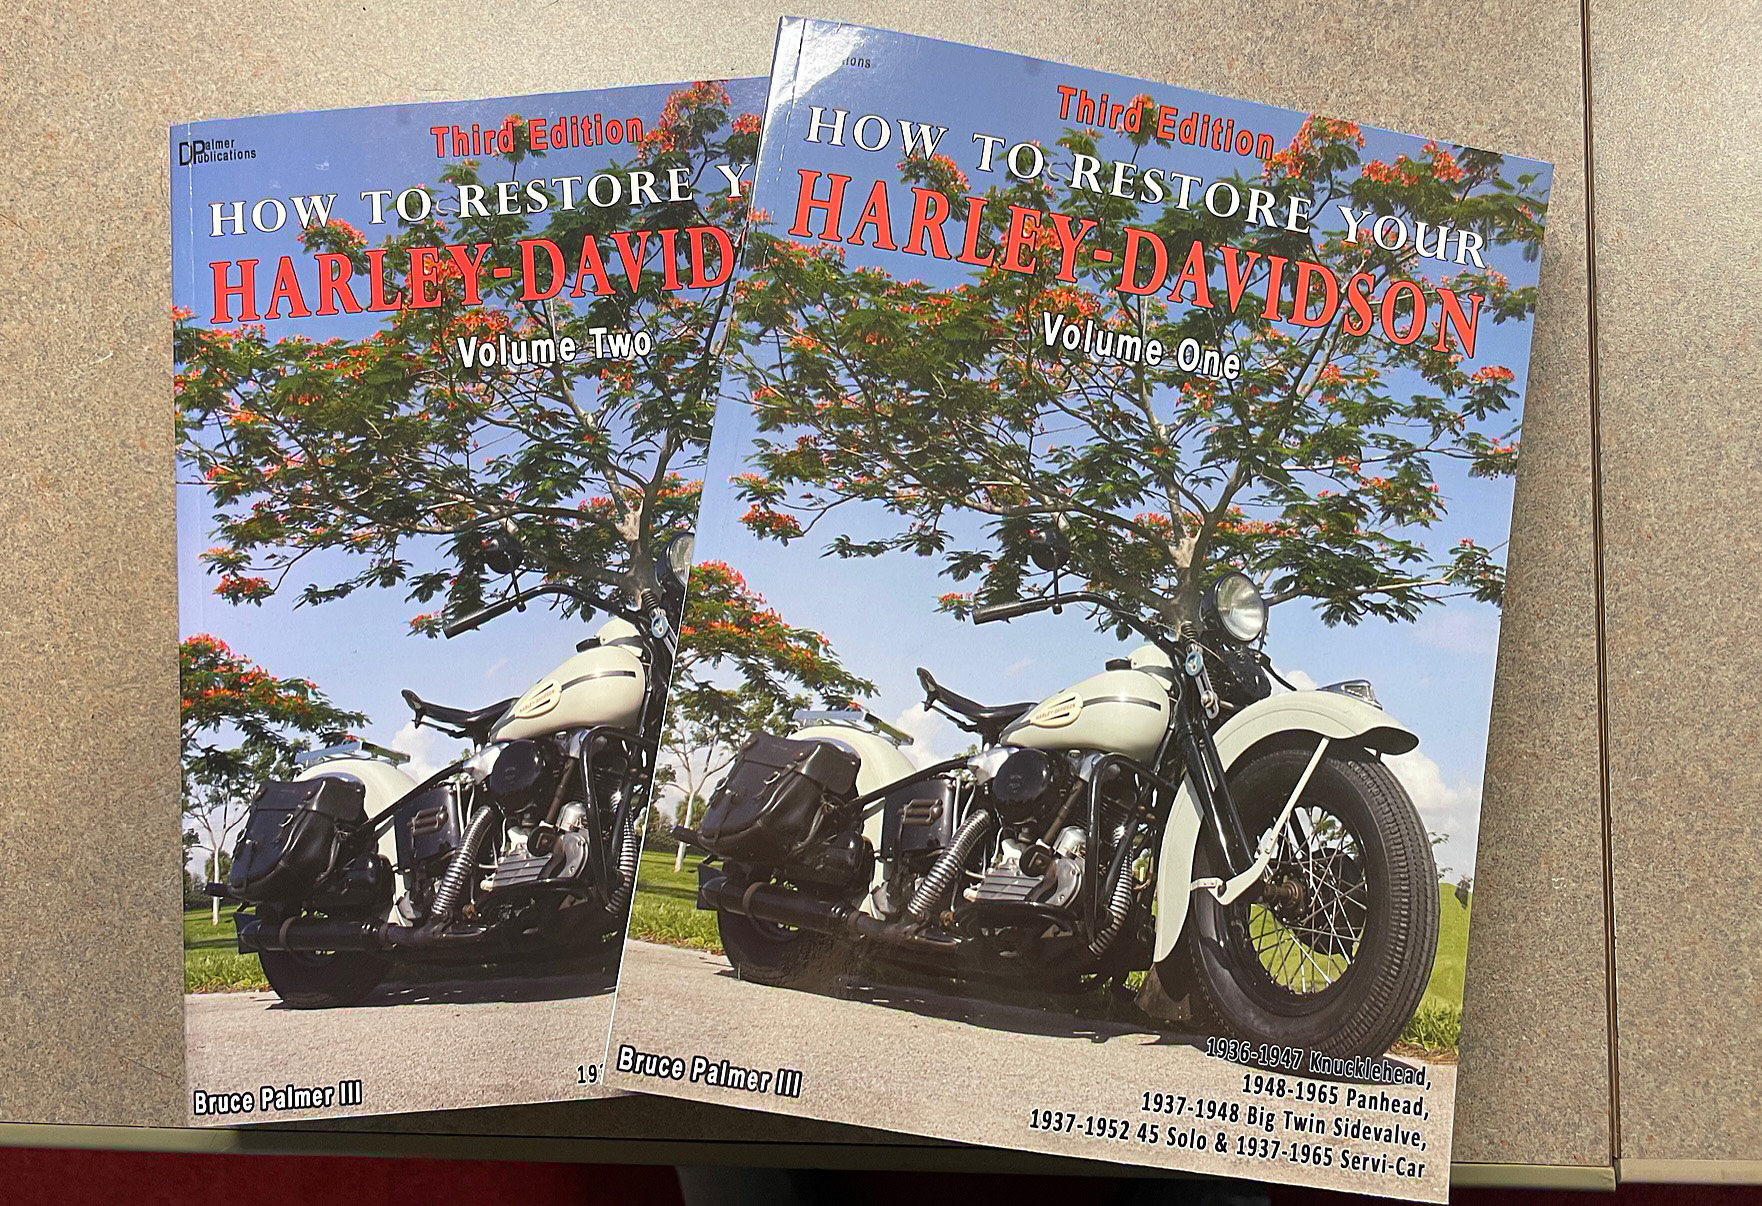 Bruce Palmer guide to restoring your HD 3rd edition $150 - Harley